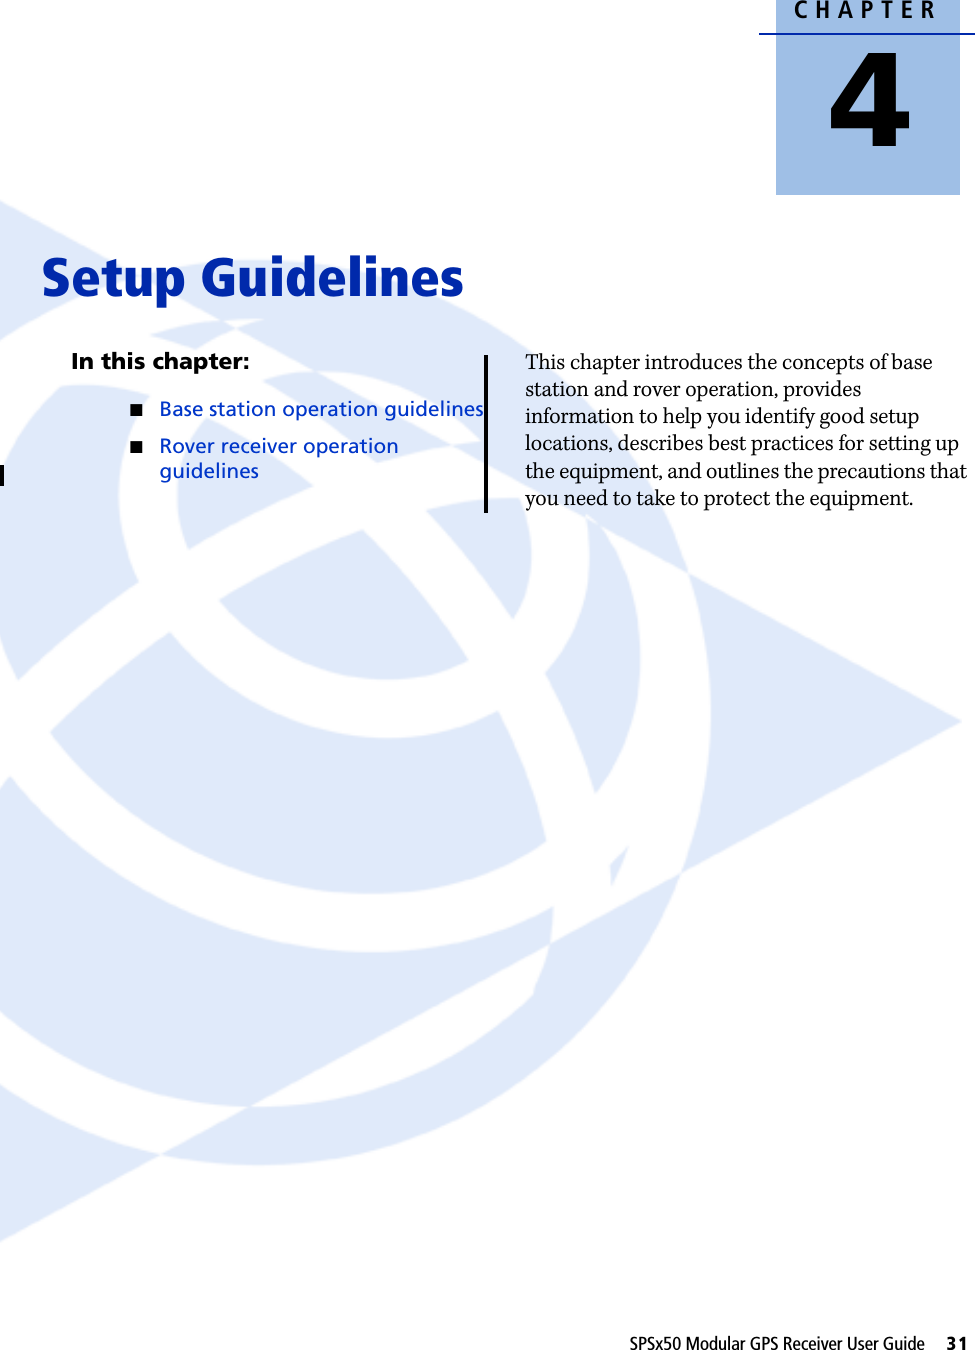 CHAPTER4SPSx50 Modular GPS Receiver User Guide     31Setup Guidelines 4In this chapter:QBase station operation guidelinesQRover receiver operation guidelinesThis chapter introduces the concepts of base station and rover operation, provides information to help you identify good setup locations, describes best practices for setting up the equipment, and outlines the precautions that you need to take to protect the equipment.